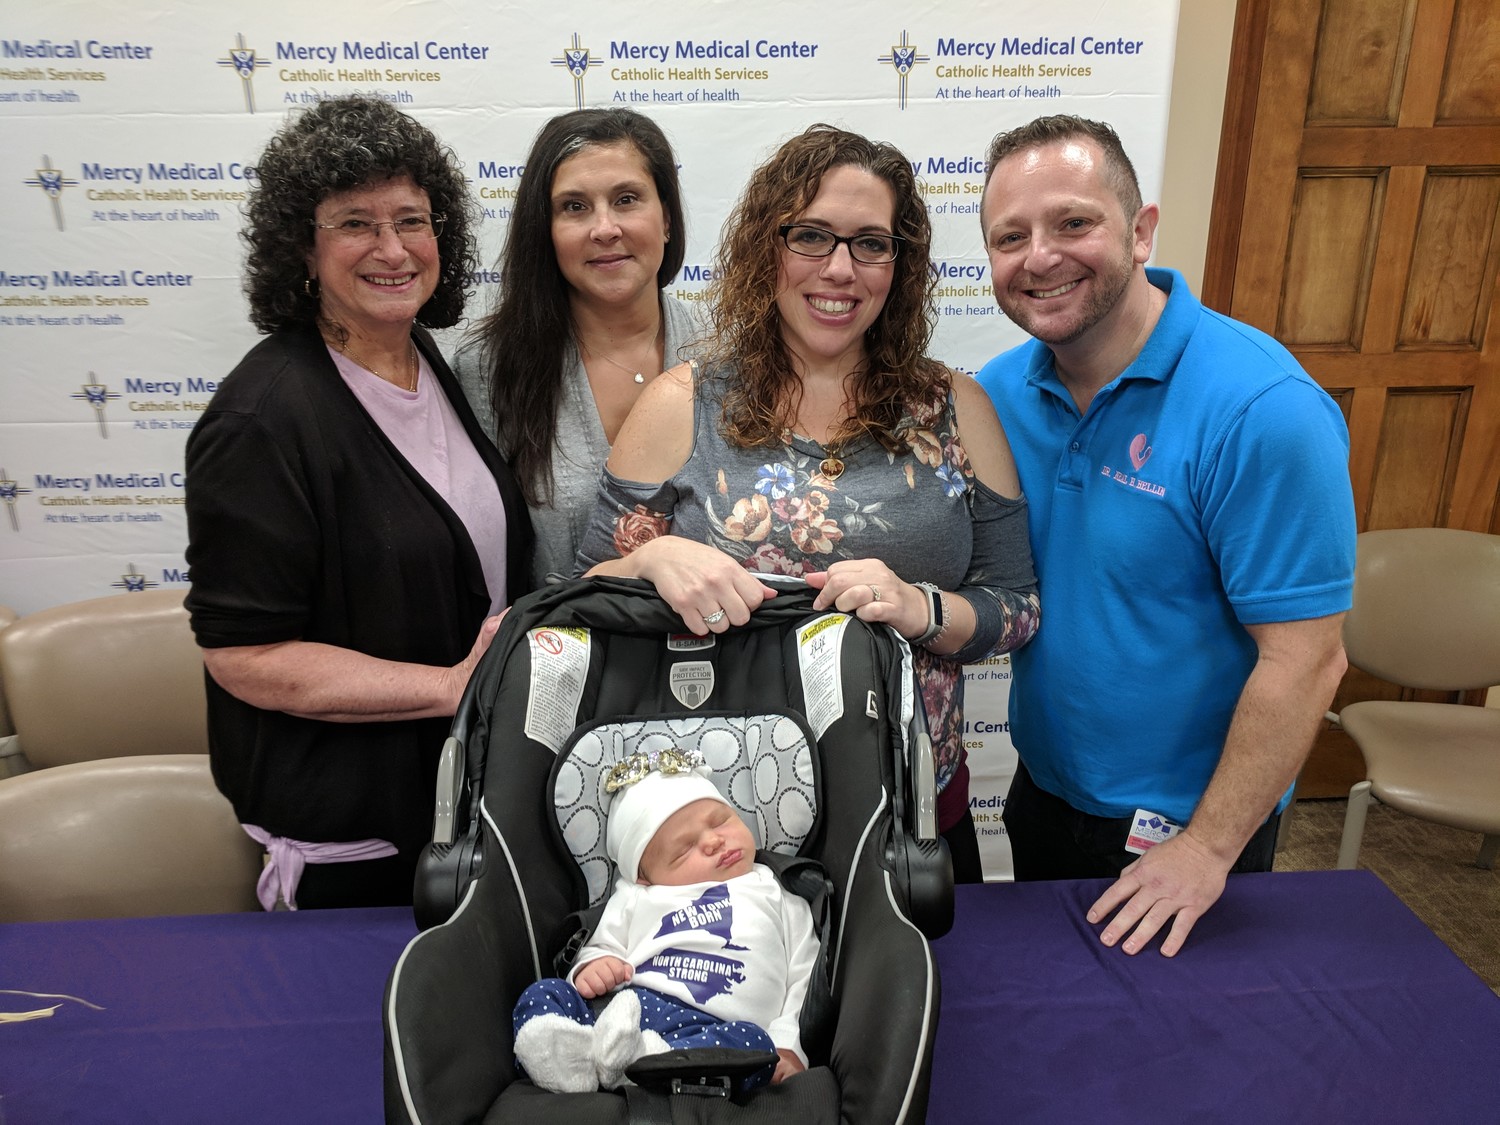 Mercy Medical Center nurse Barbara Weiss, left, joined fellow nurse Melissa Calvo, Jennifer Williams and Dr. Neal Bellin last Friday as they wished farewell to Williams and her newborn daughter, Leilah Faith Williams, before they headed home to North Carolina.